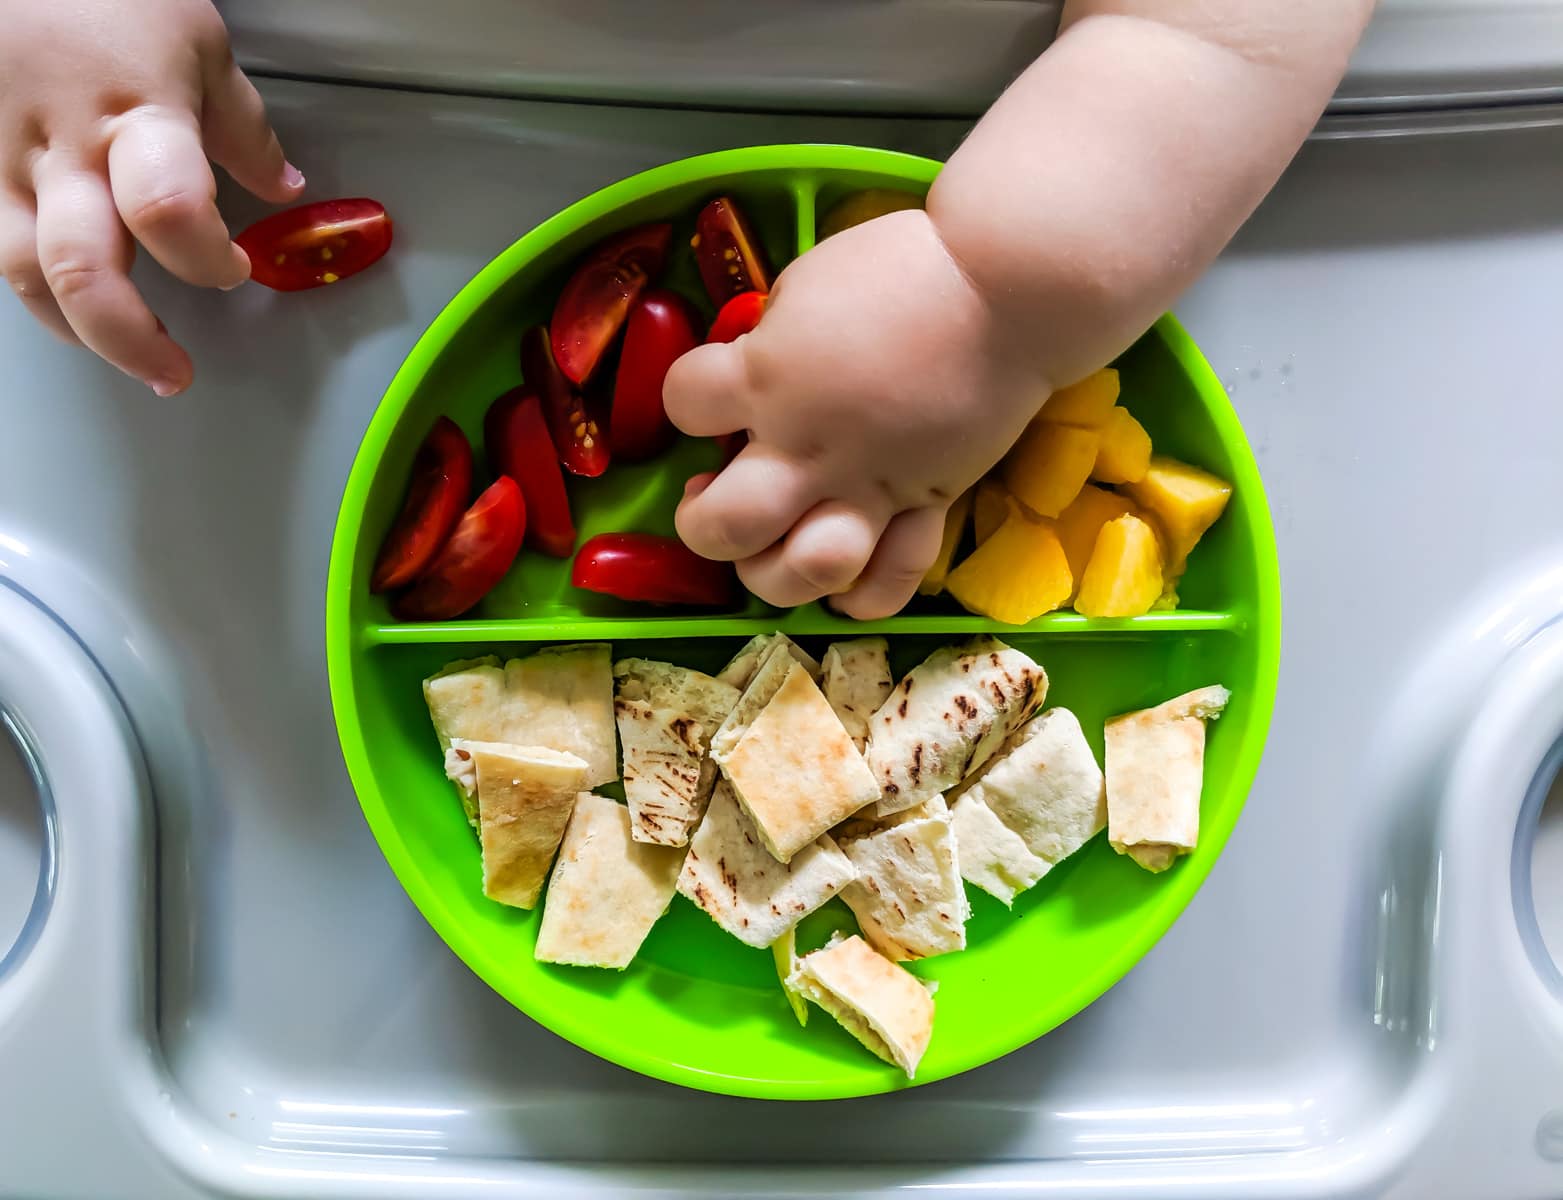 Toddler reaching for a colorful assortment of healthy breakfast options on a bright green divided plate.